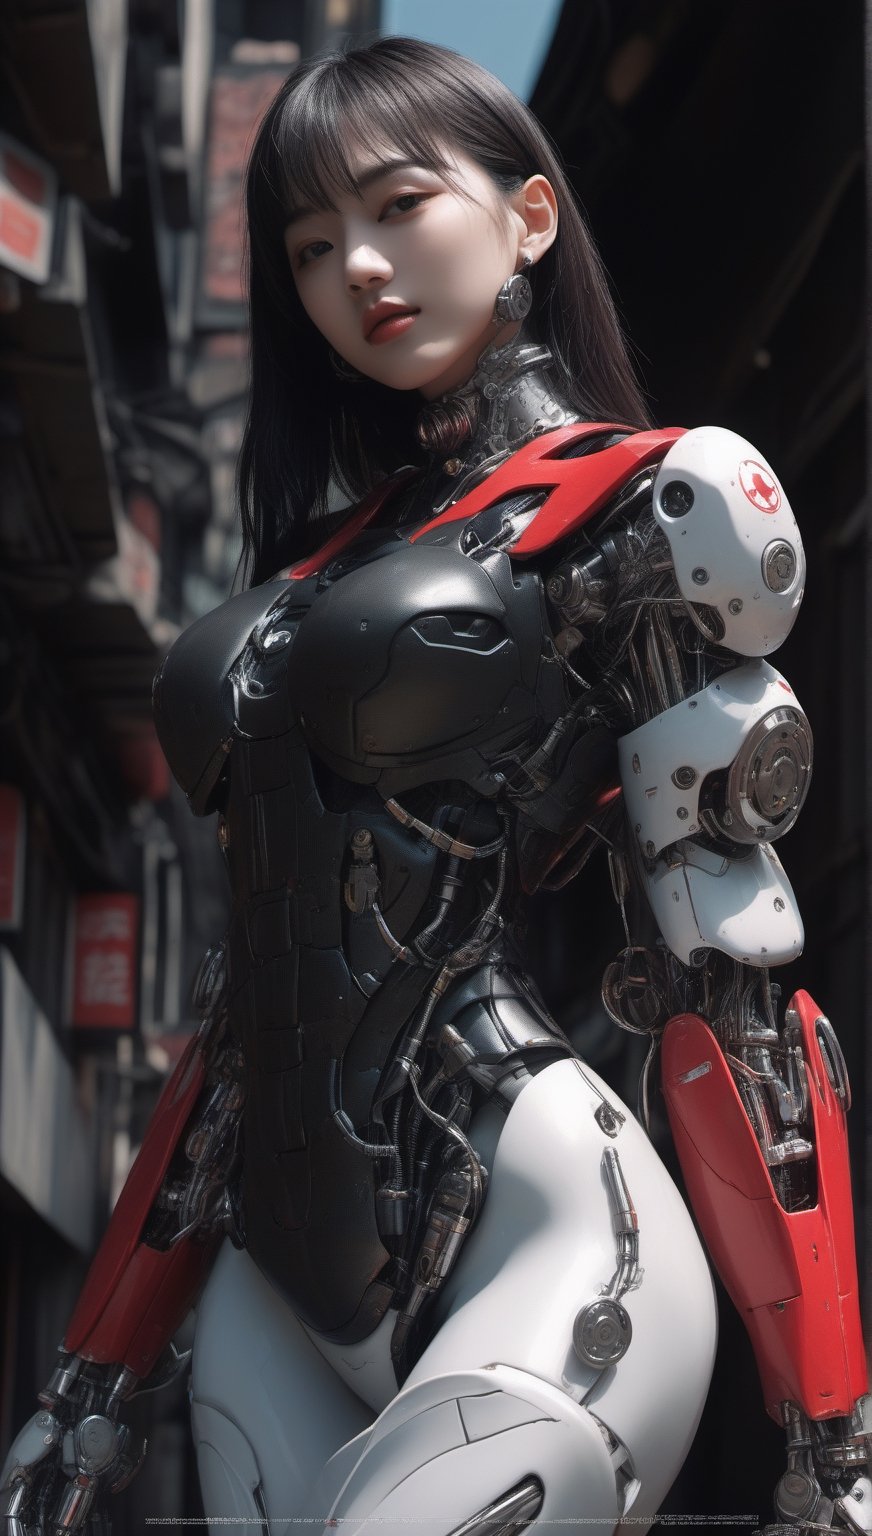 beautiful Japan cyborg girl, with super delicate face, skinny plump figure ,mechanical joints, metal details,sidesexwithfeet,MikieHara,cyberpunk style